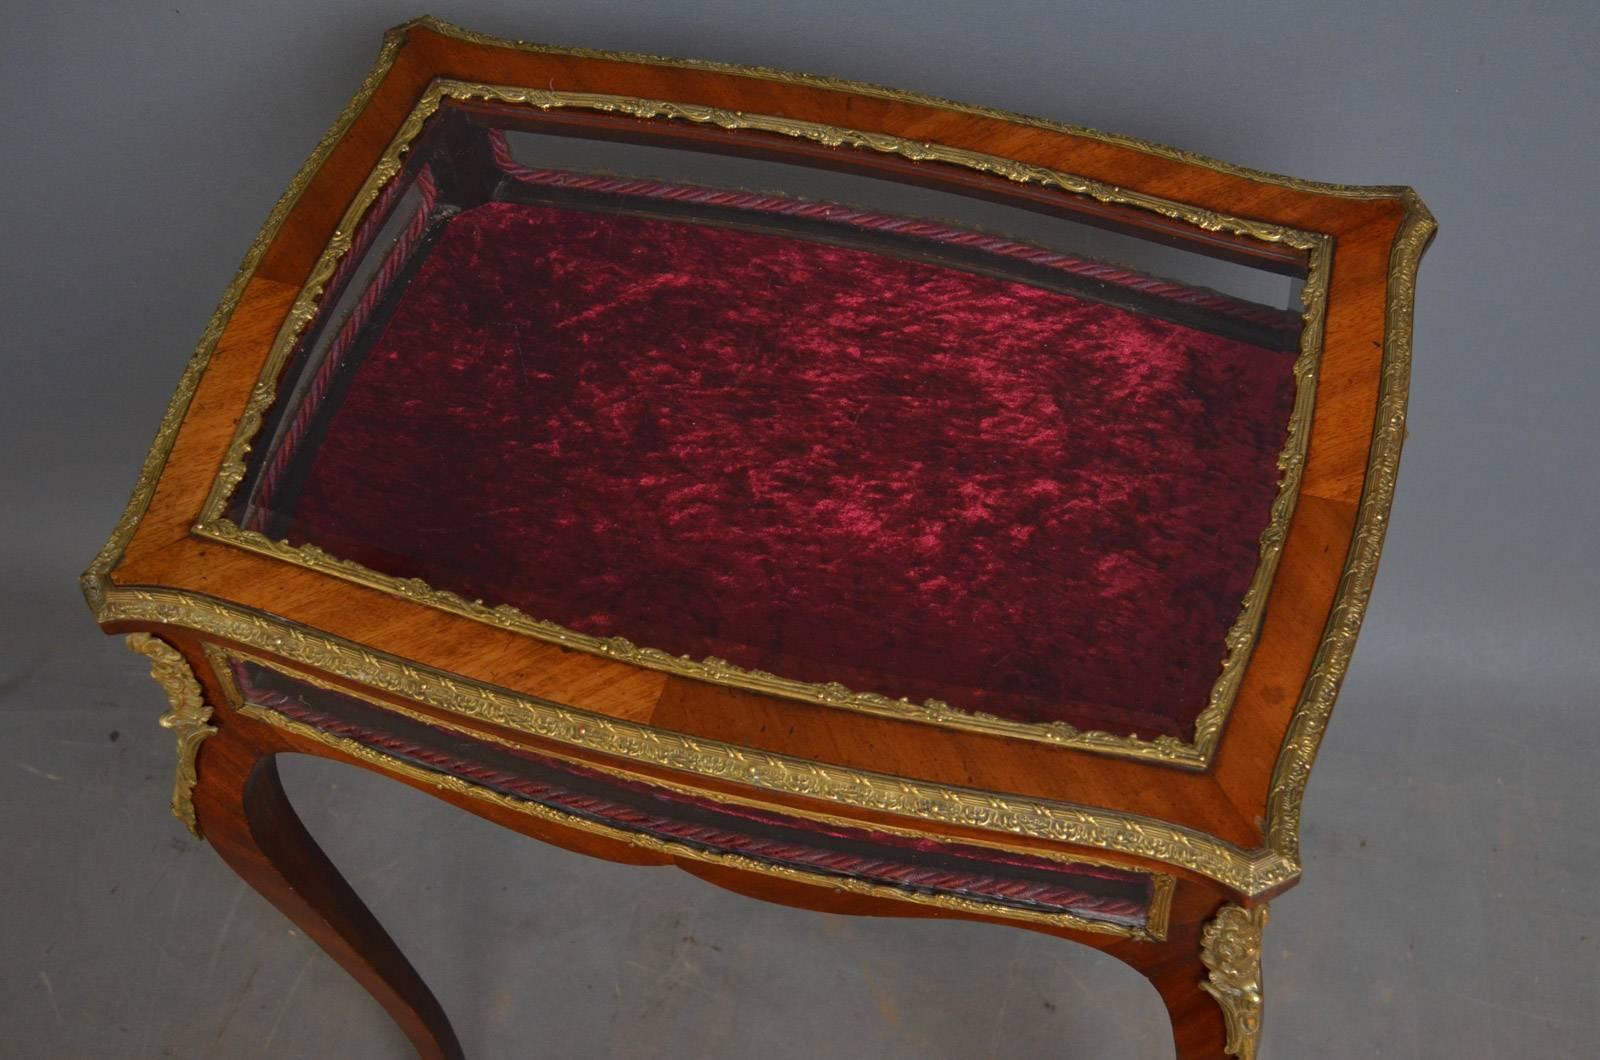 Sn4299 elegant 19th century mahogany display table, having hinged lid decorated with brass moulding and newly relined crushed velvet interior, all standing on cabriole legs terminating in brass sabots, this antique table in ormolu and brass